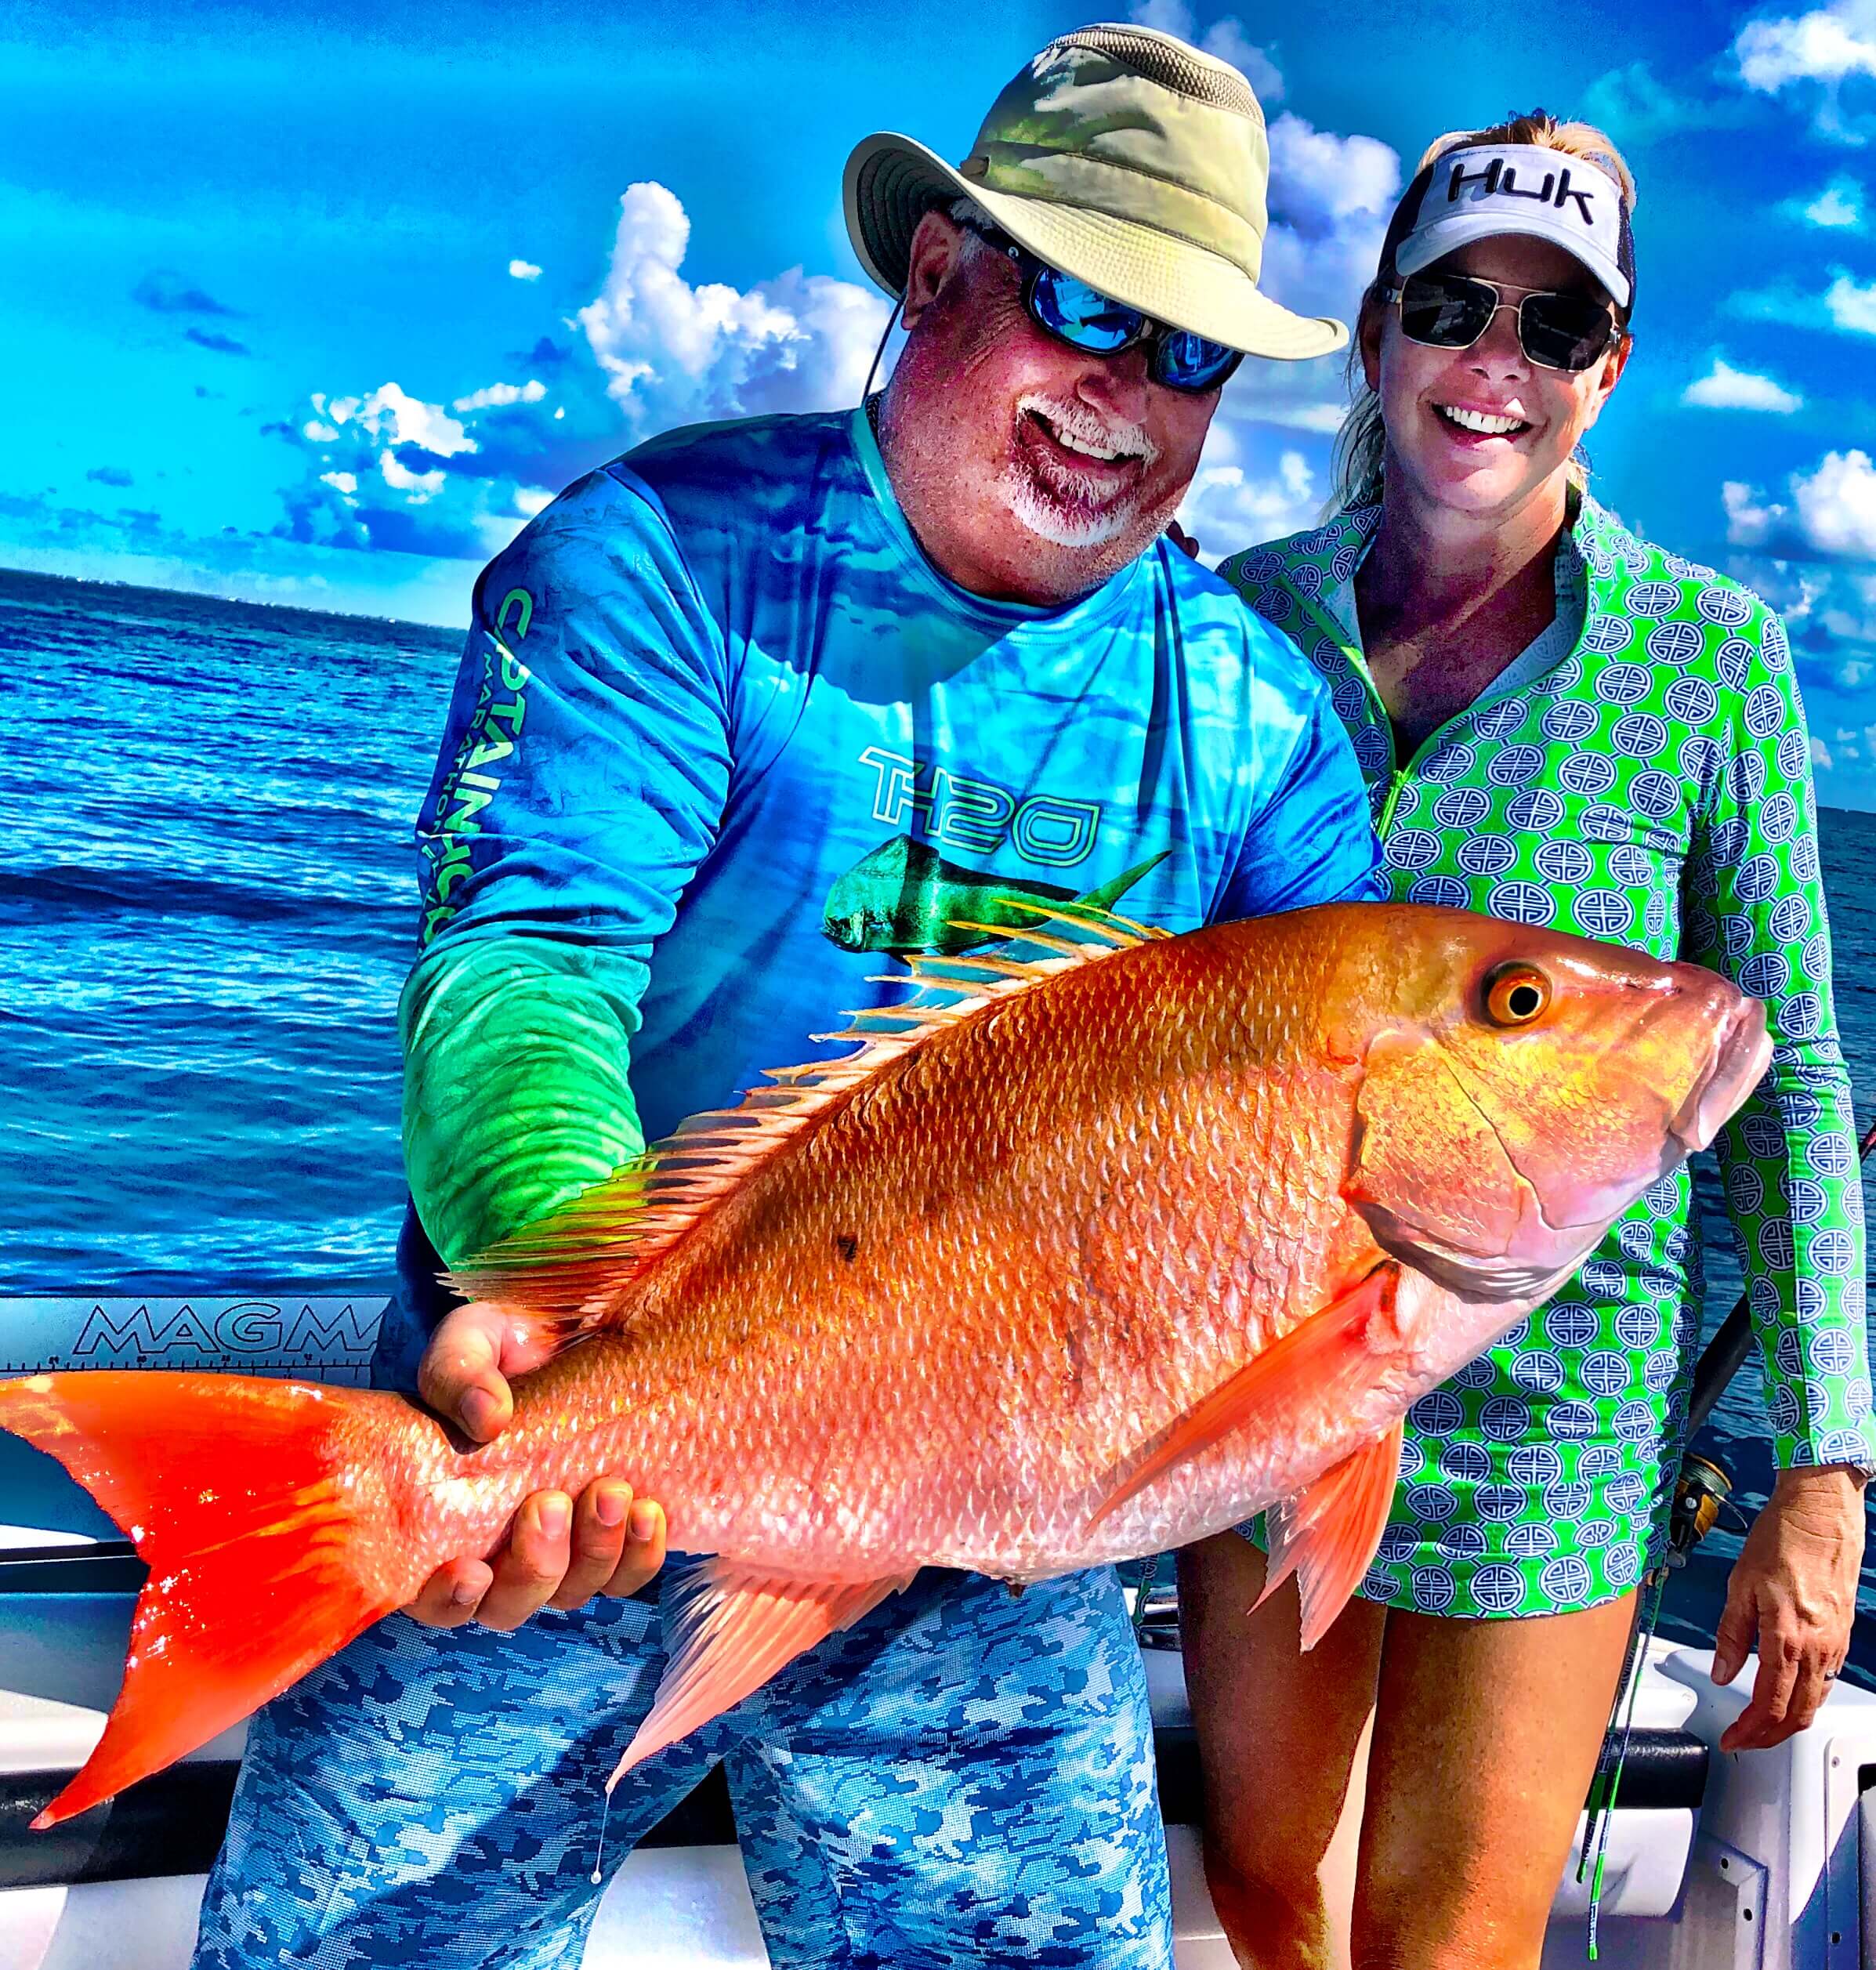 Keeper Mutton Snapper Caught On Light Tackle - Fishing The Florida Keys 